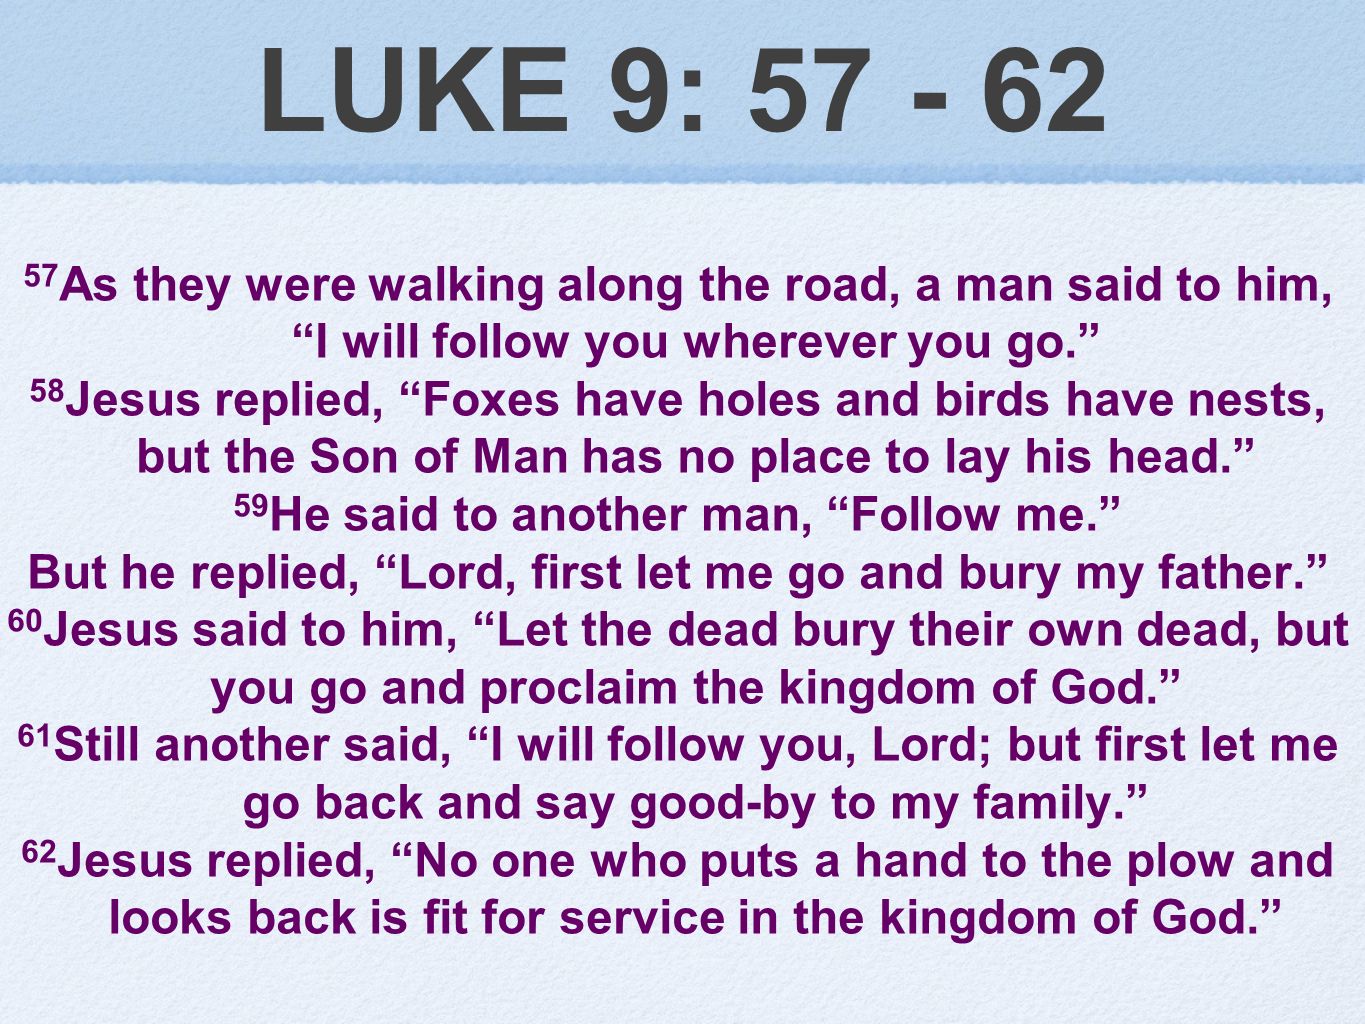 LUKE 9: As they were walking along the road, a man said to him, I will follow you wherever you go. 58 Jesus replied, Foxes have holes and birds have nests, but the Son of Man has no place to lay his head. 59 He said to another man, Follow me. But he replied, Lord, first let me go and bury my father. 60 Jesus said to him, Let the dead bury their own dead, but you go and proclaim the kingdom of God. 61 Still another said, I will follow you, Lord; but first let me go back and say good-by to my family. 62 Jesus replied, No one who puts a hand to the plow and looks back is fit for service in the kingdom of God.